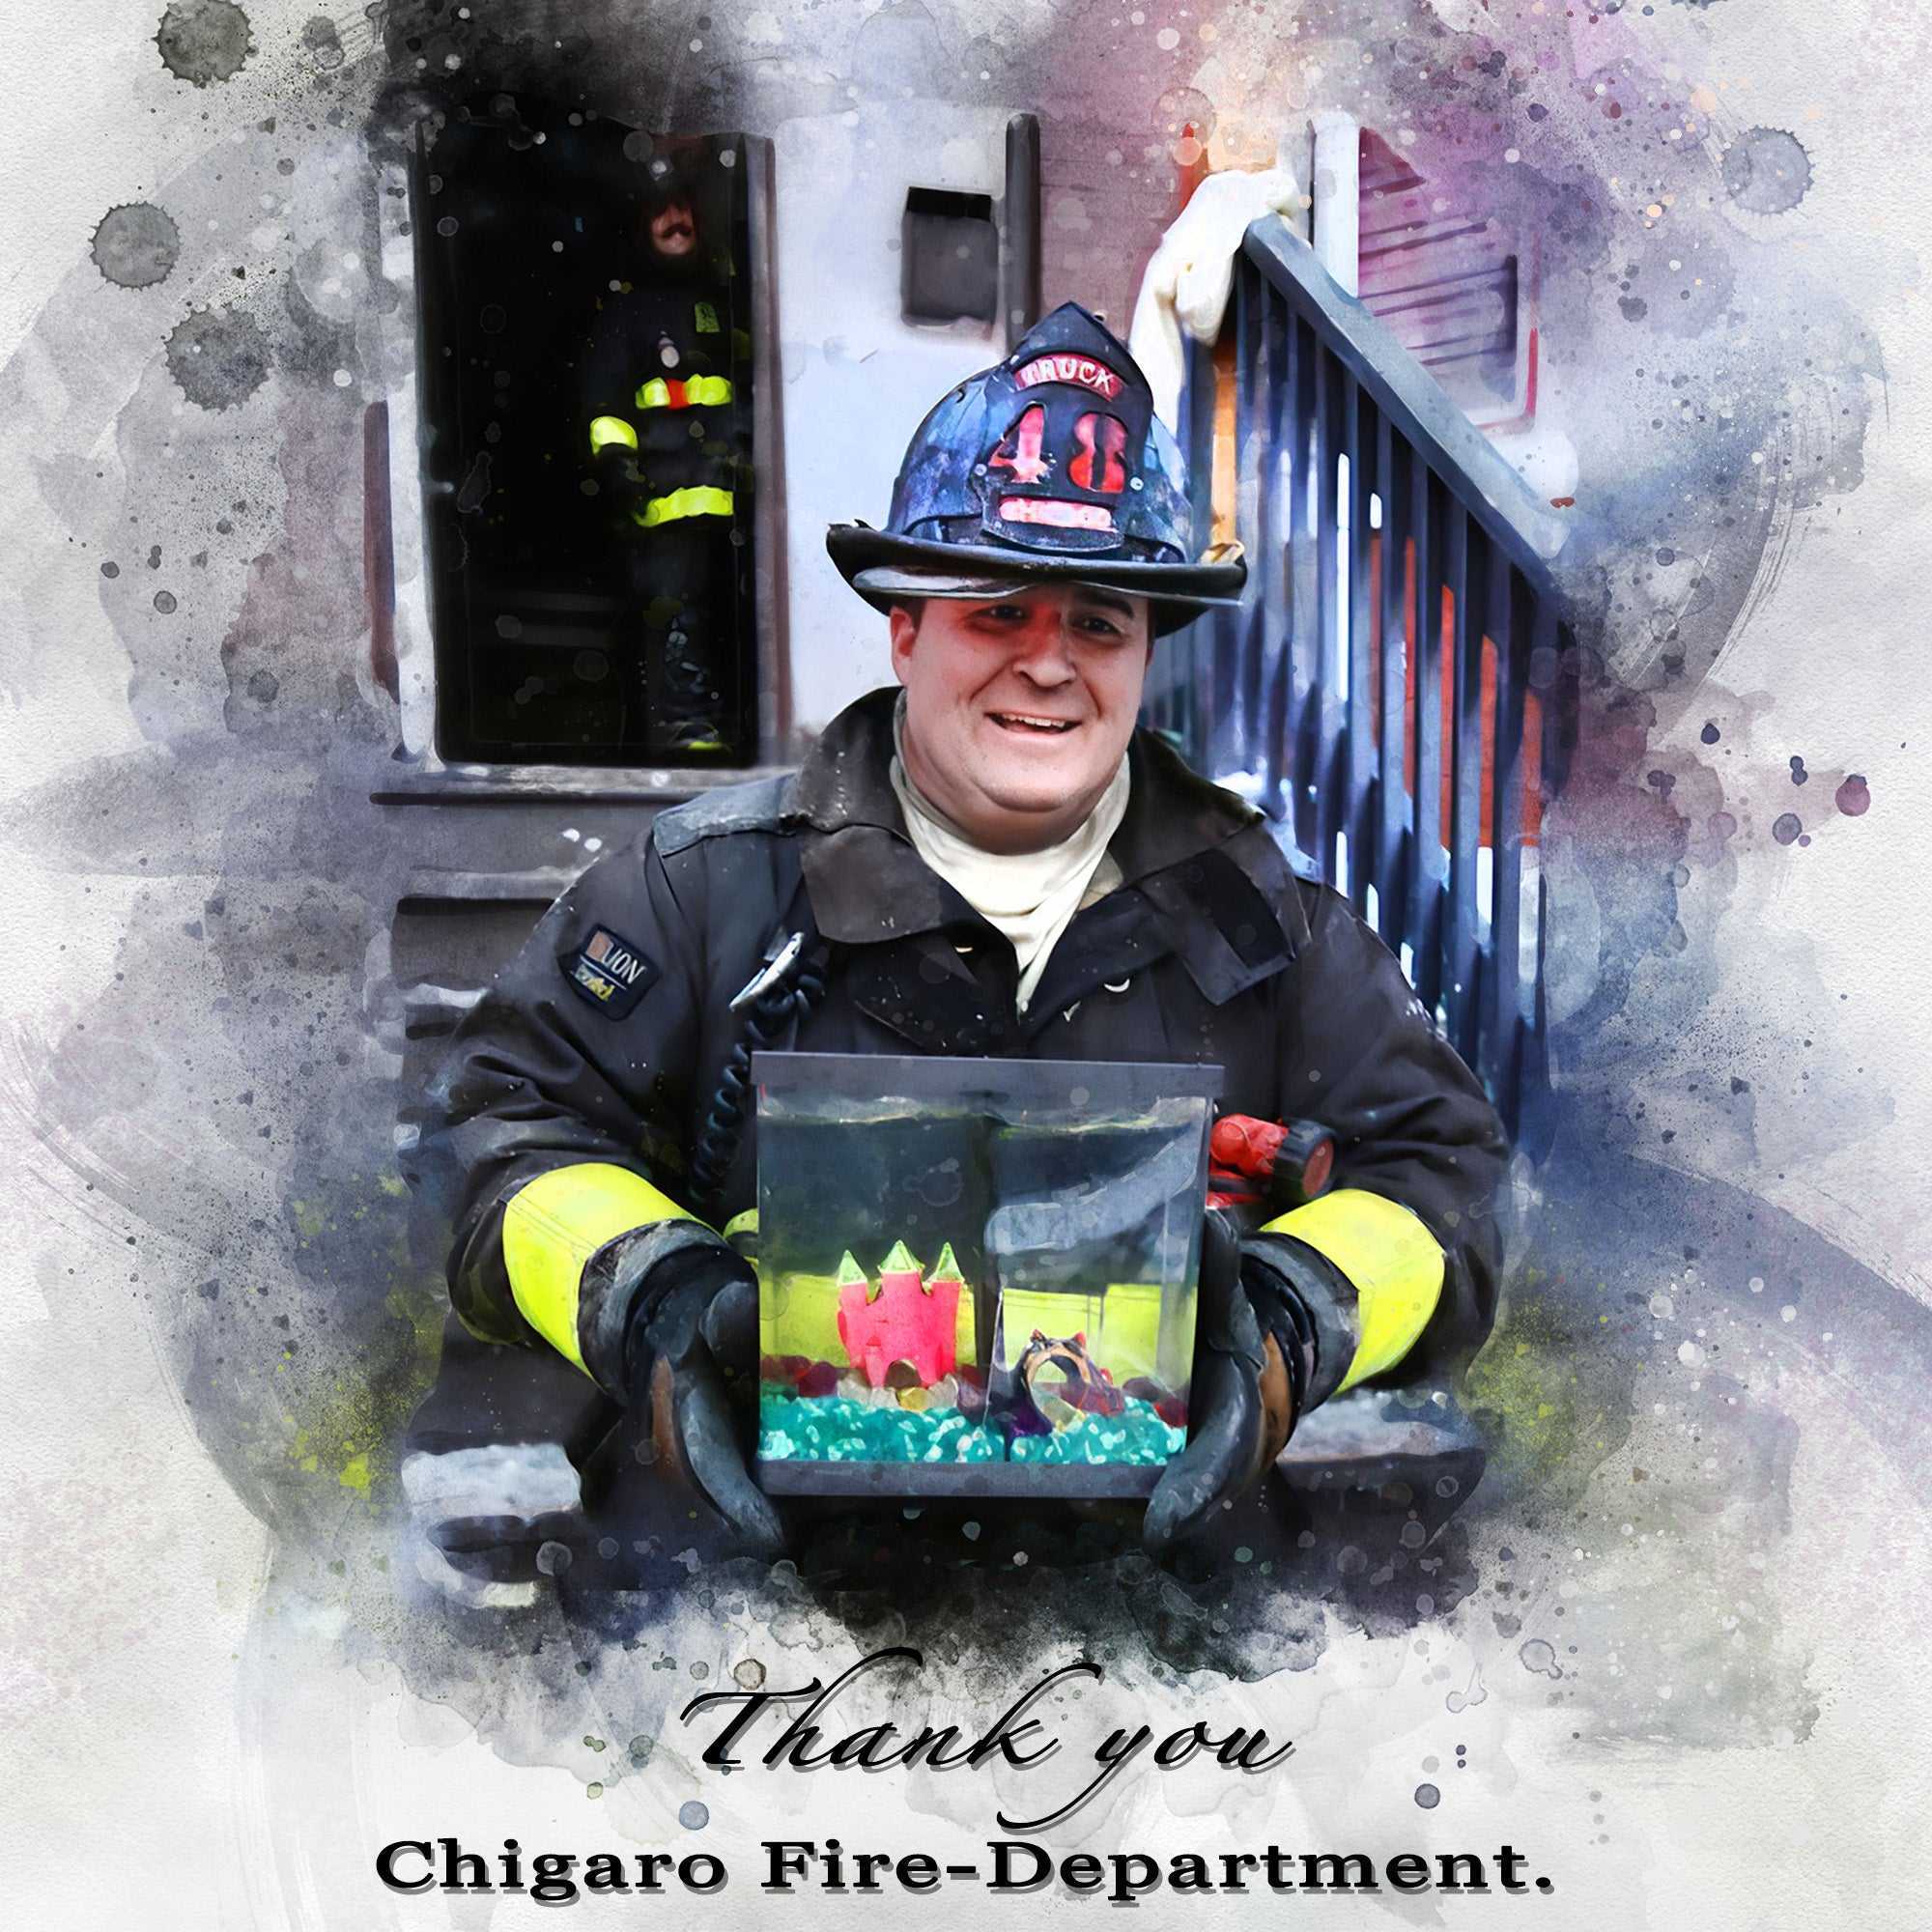 Fire Department Gifts | Firefighter Retirement Gifts | Fireman Gifts | Firefighter Presents Ideas | Fire Department Gifts - FromPicToArt